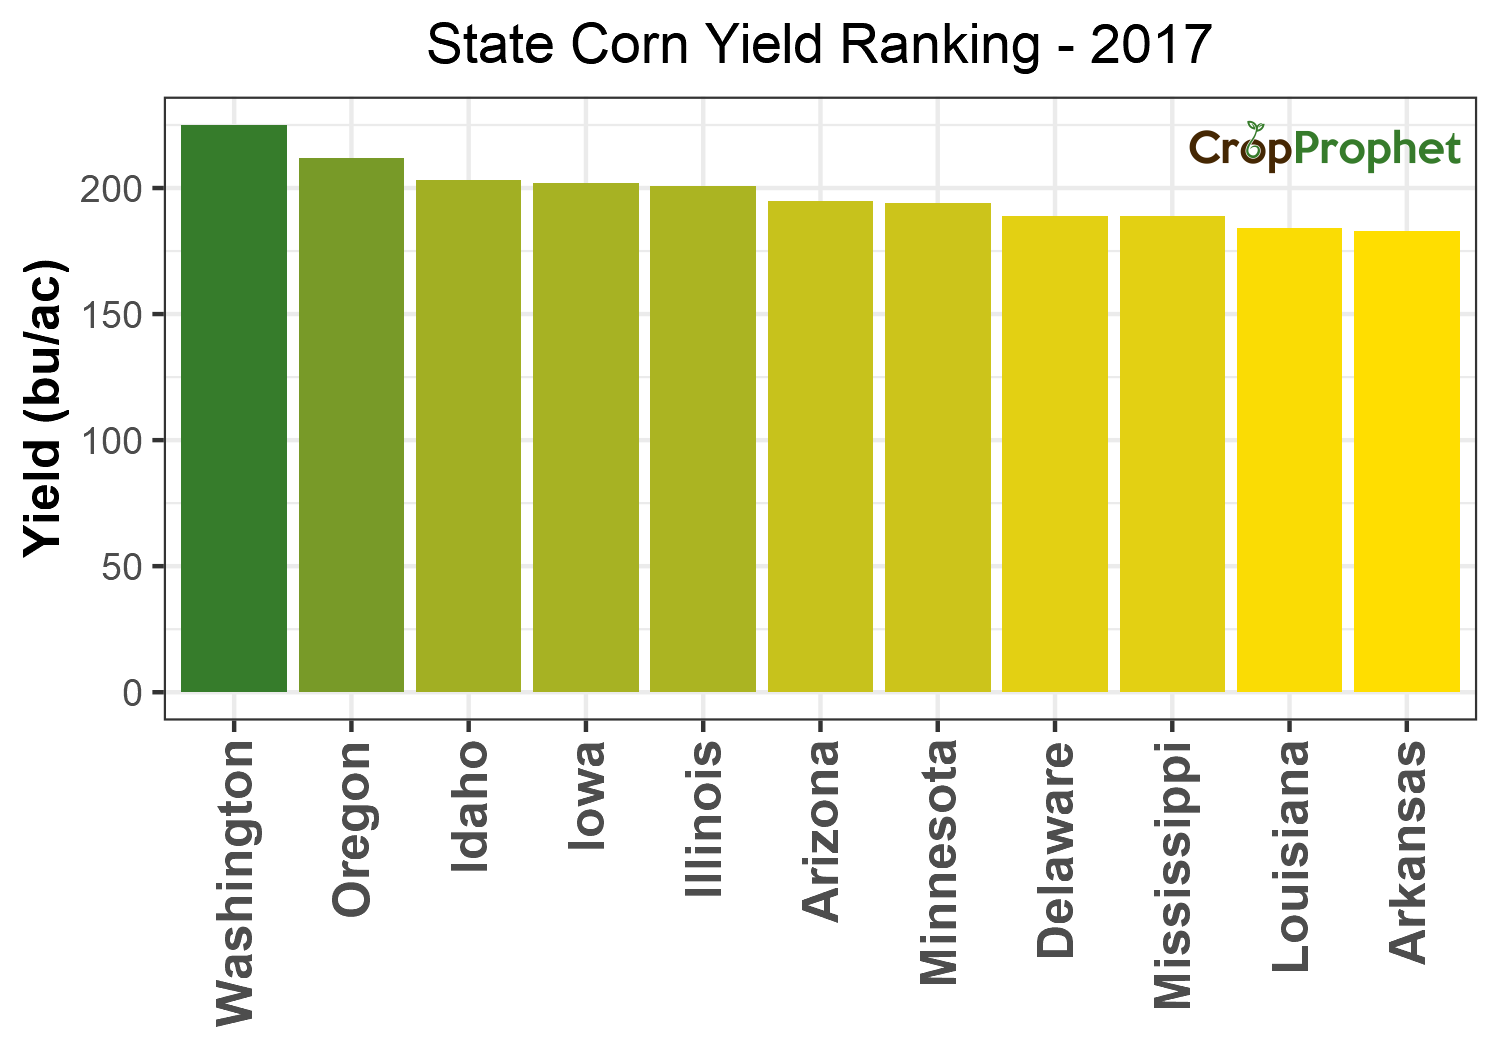 Corn Production by State - 2017 Rankings